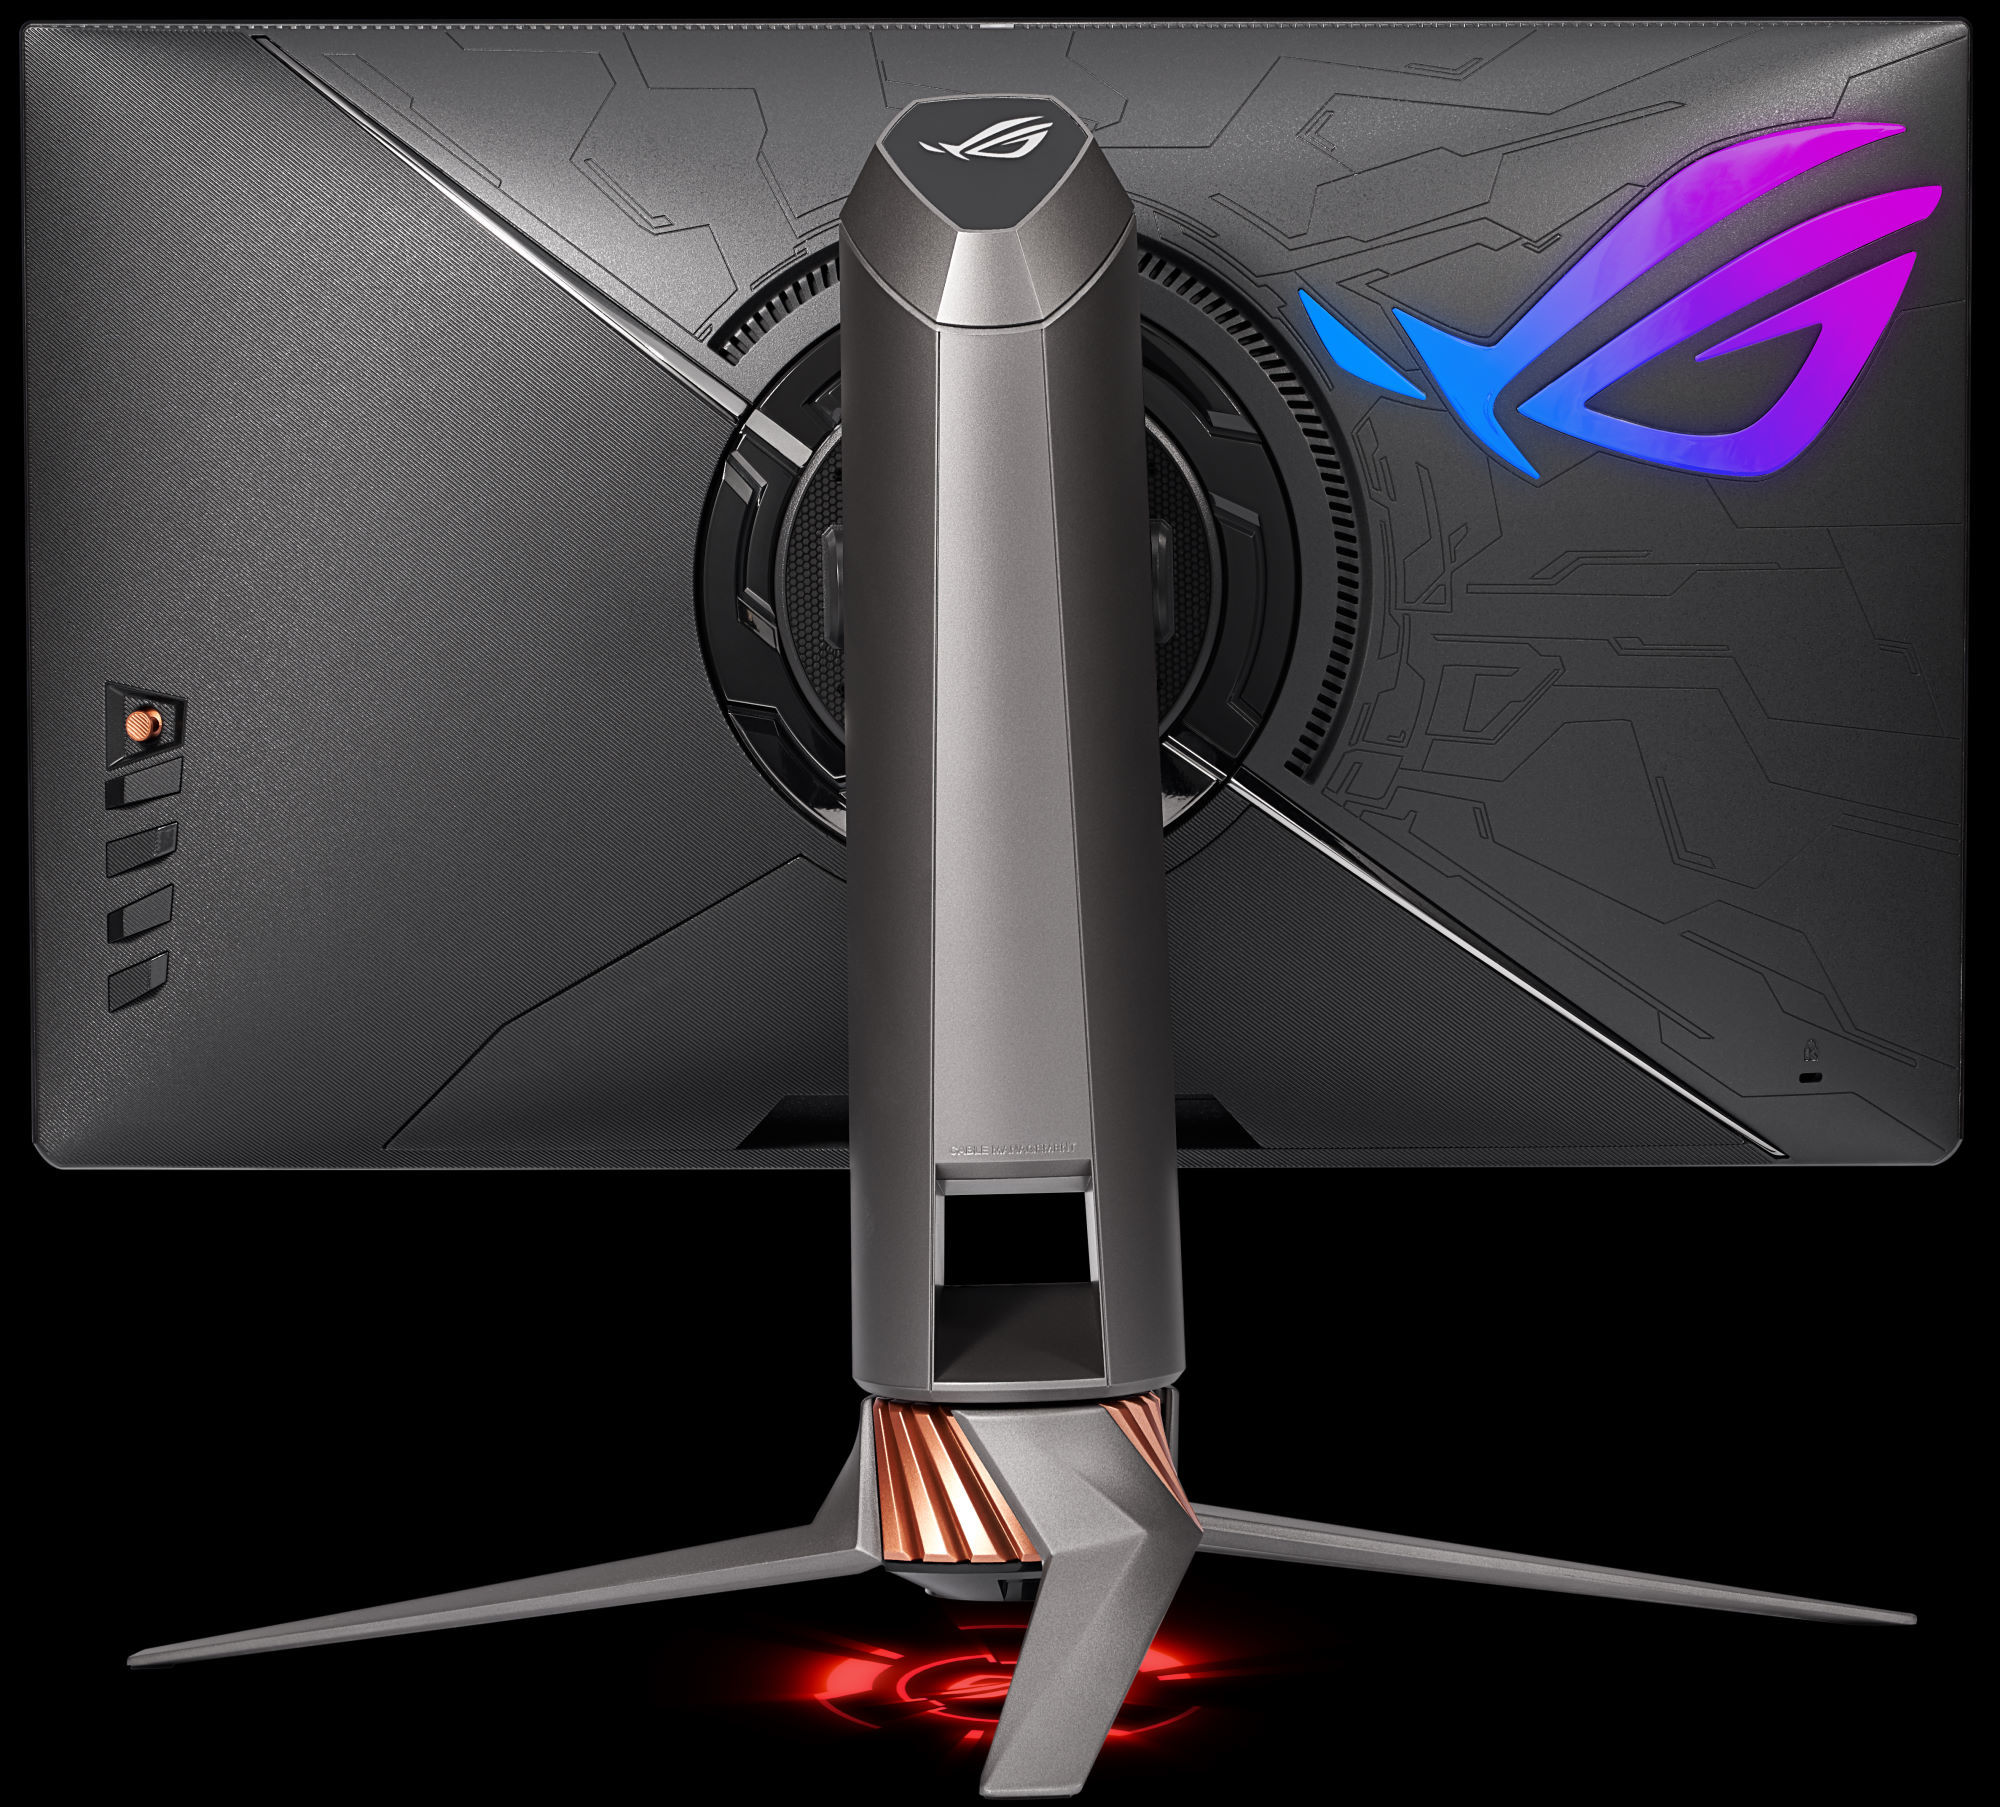 Media asset in full size related to 3dfxzone.it news item entitled as follows: NVIDIA e ASUS annunciano il monitor ROG Swift 360Hz per gaming eSports | Image Name: news30323_NVIDIA-ROG-Swift-360Hz_2.jpg